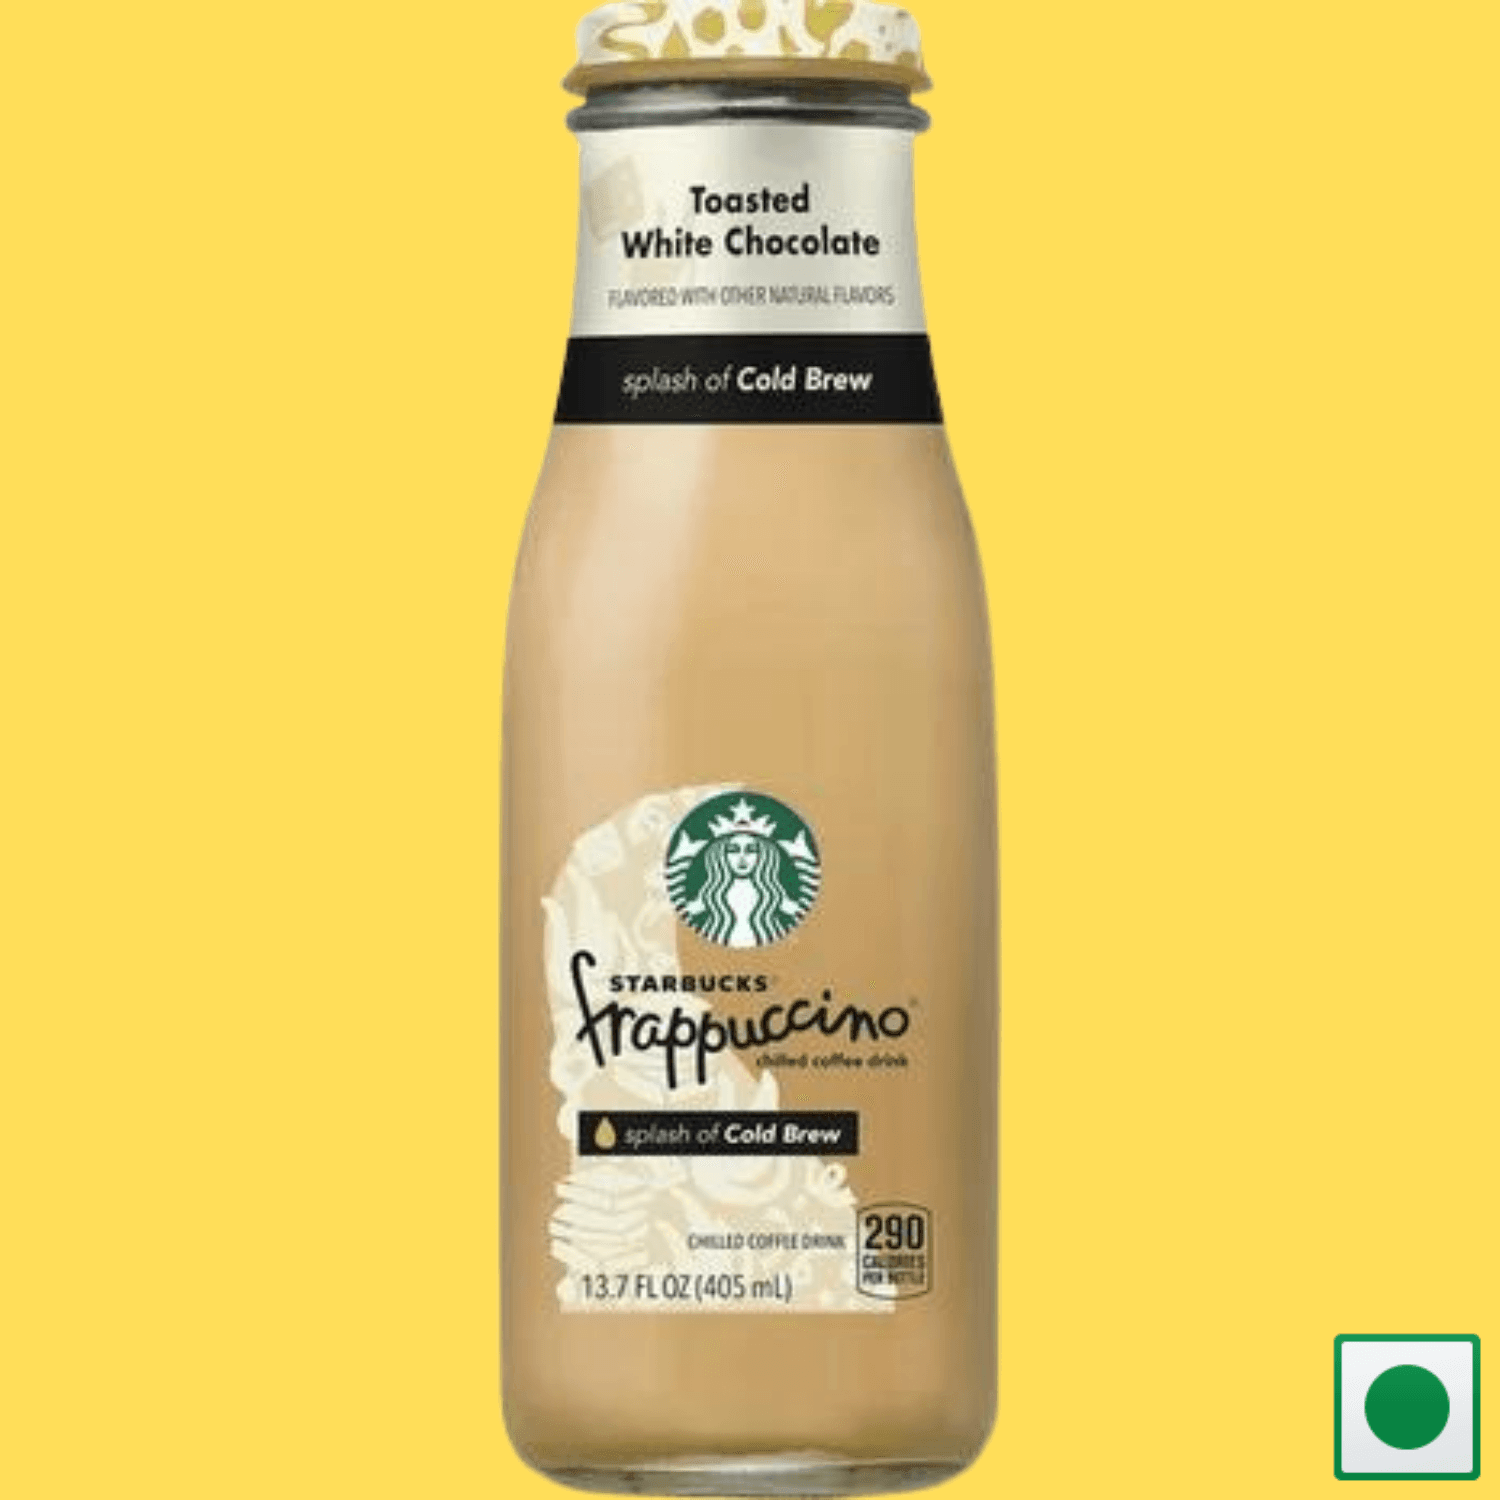 Starbucks Frappuccino Toasted White Chocolate with Cold Brew Iced Coffee Drink, 405ml (Imported) - Super 7 Mart